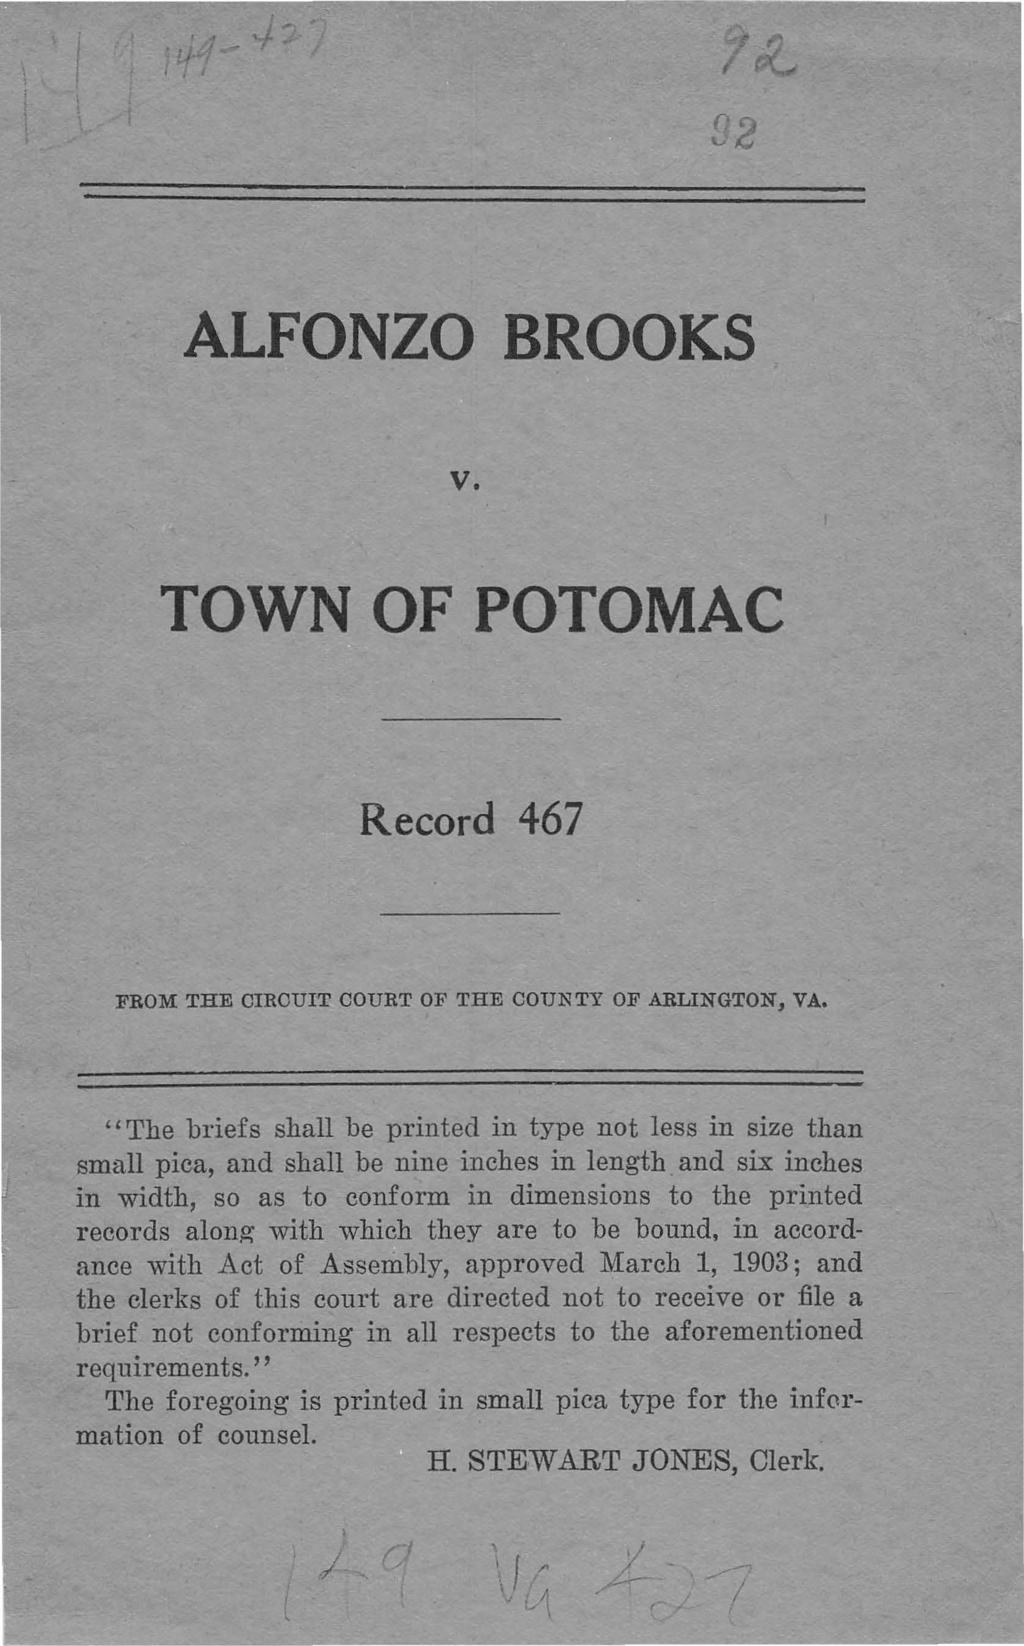 t) I I ALFONZO BROOKS v. TOWN OF POTOMAC Record 467 FROM THE CIRCUIT COURT OF THE COUNTY OF ARLINGTON, VA.